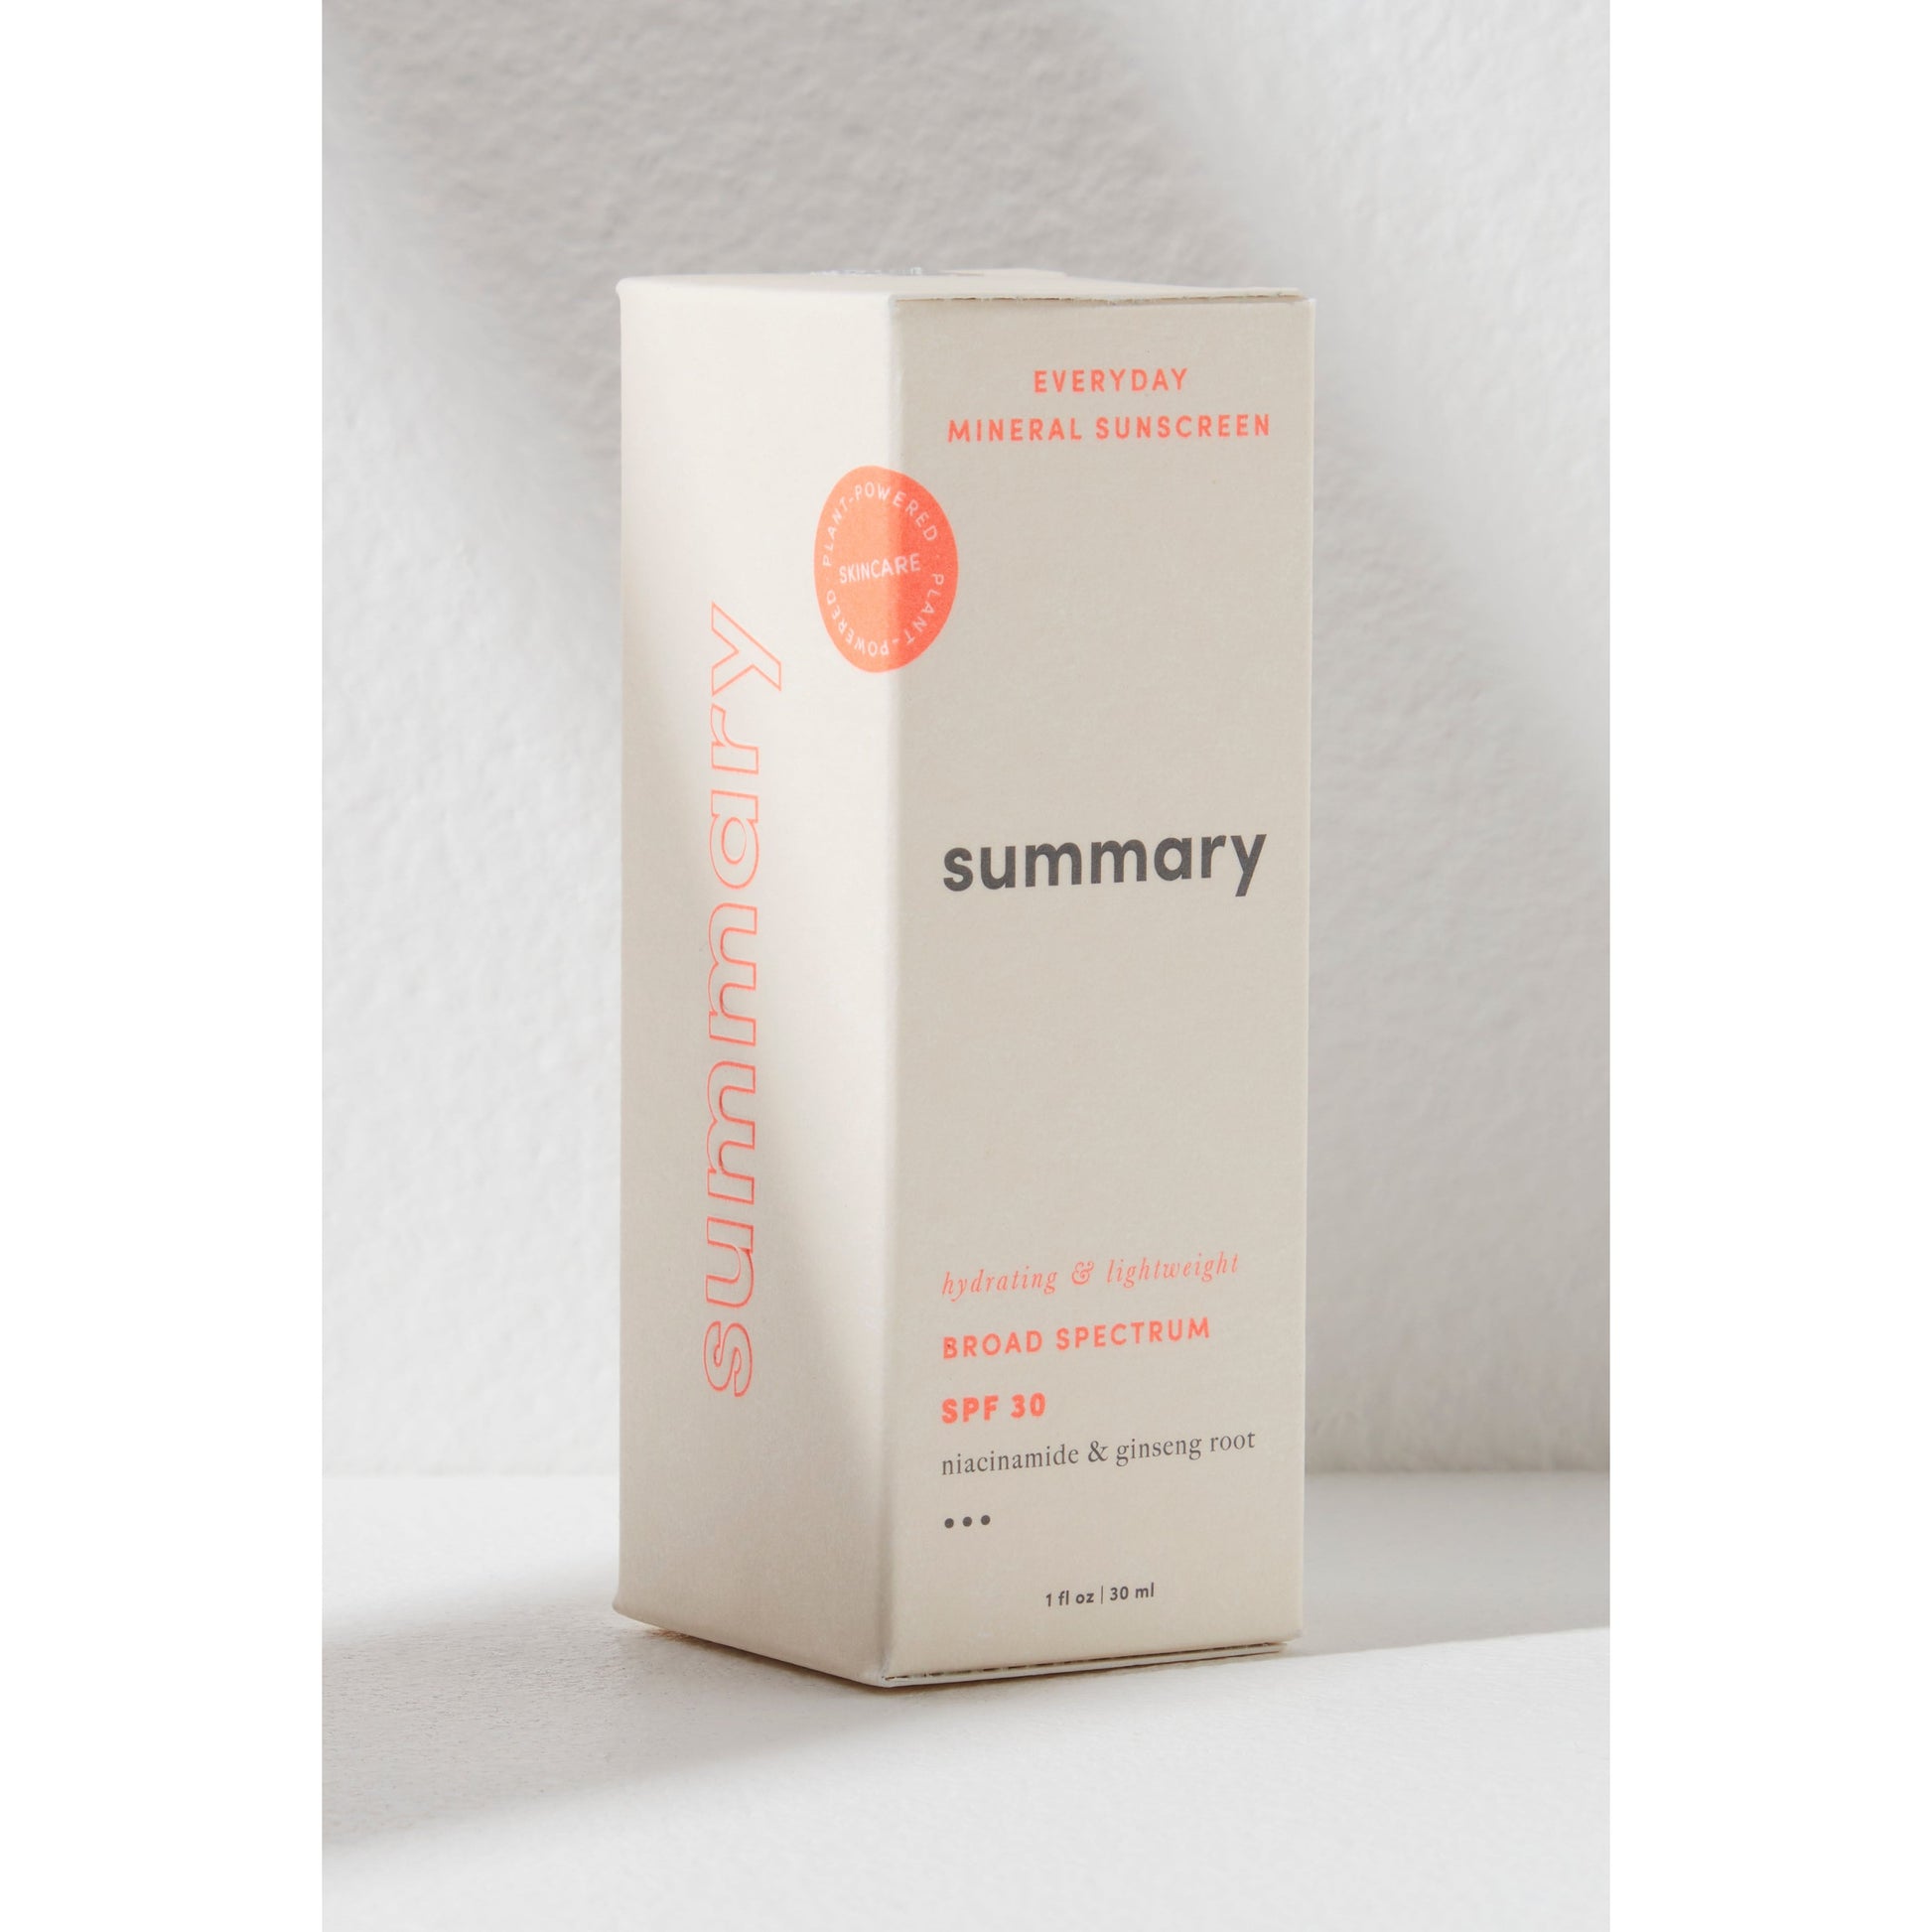 A beige box of "Free People Movement's Summary SPF 30 mineral-based sunscreen" standing upright against a white textured background.